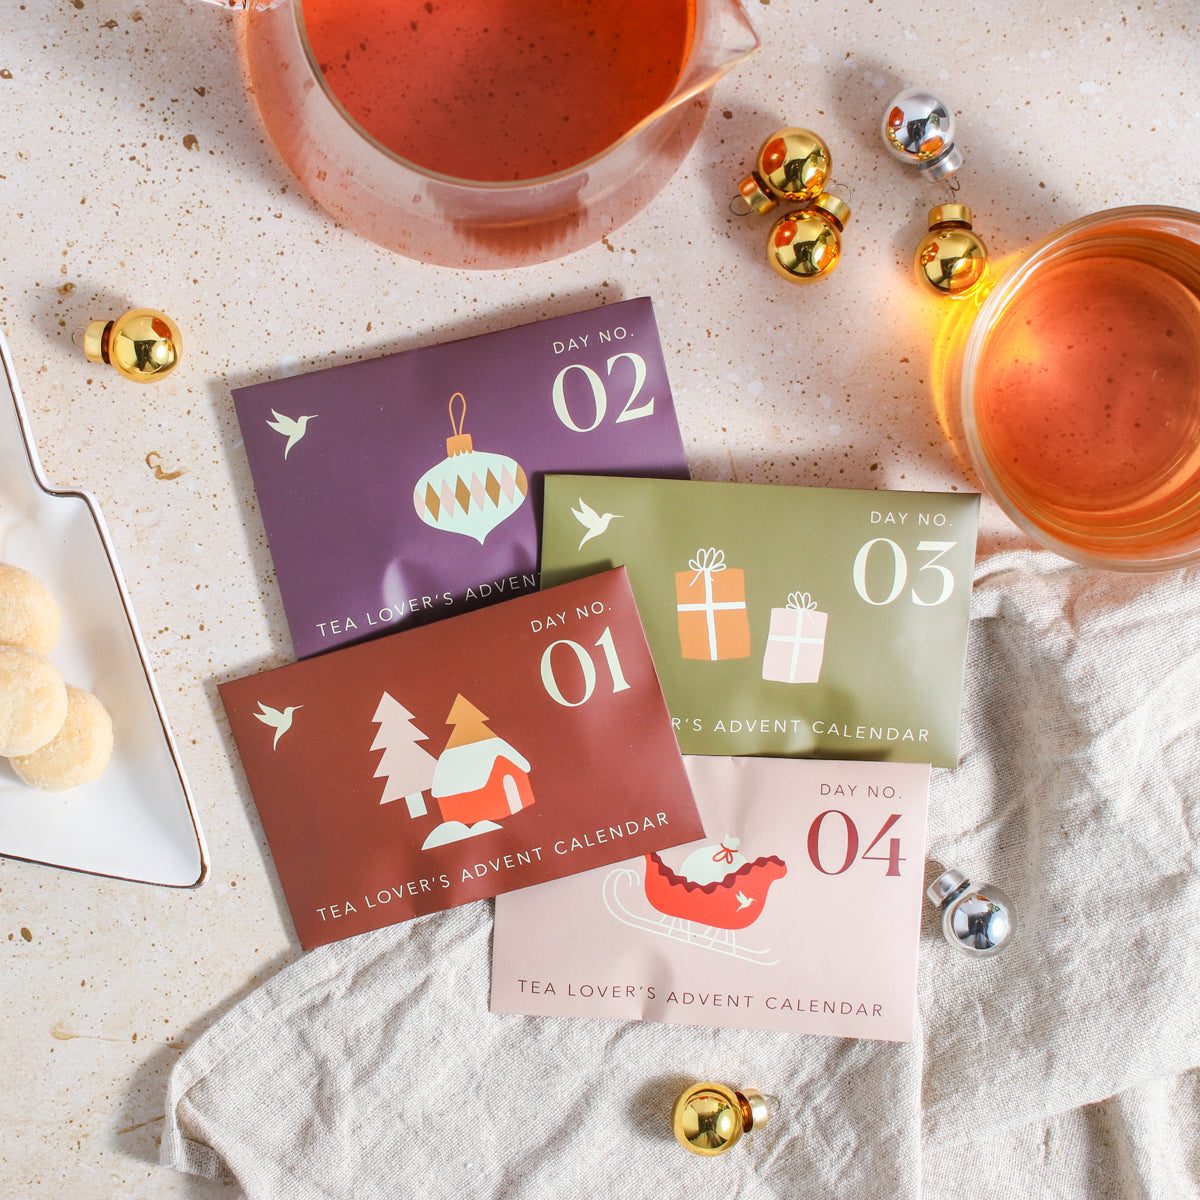 A colorful collection of 4 daily Advent envelopes, surrounded by silver and gold ornaments, shortbread cookies, a tea towel, a teapot, and a cup of tea shown from overhead.